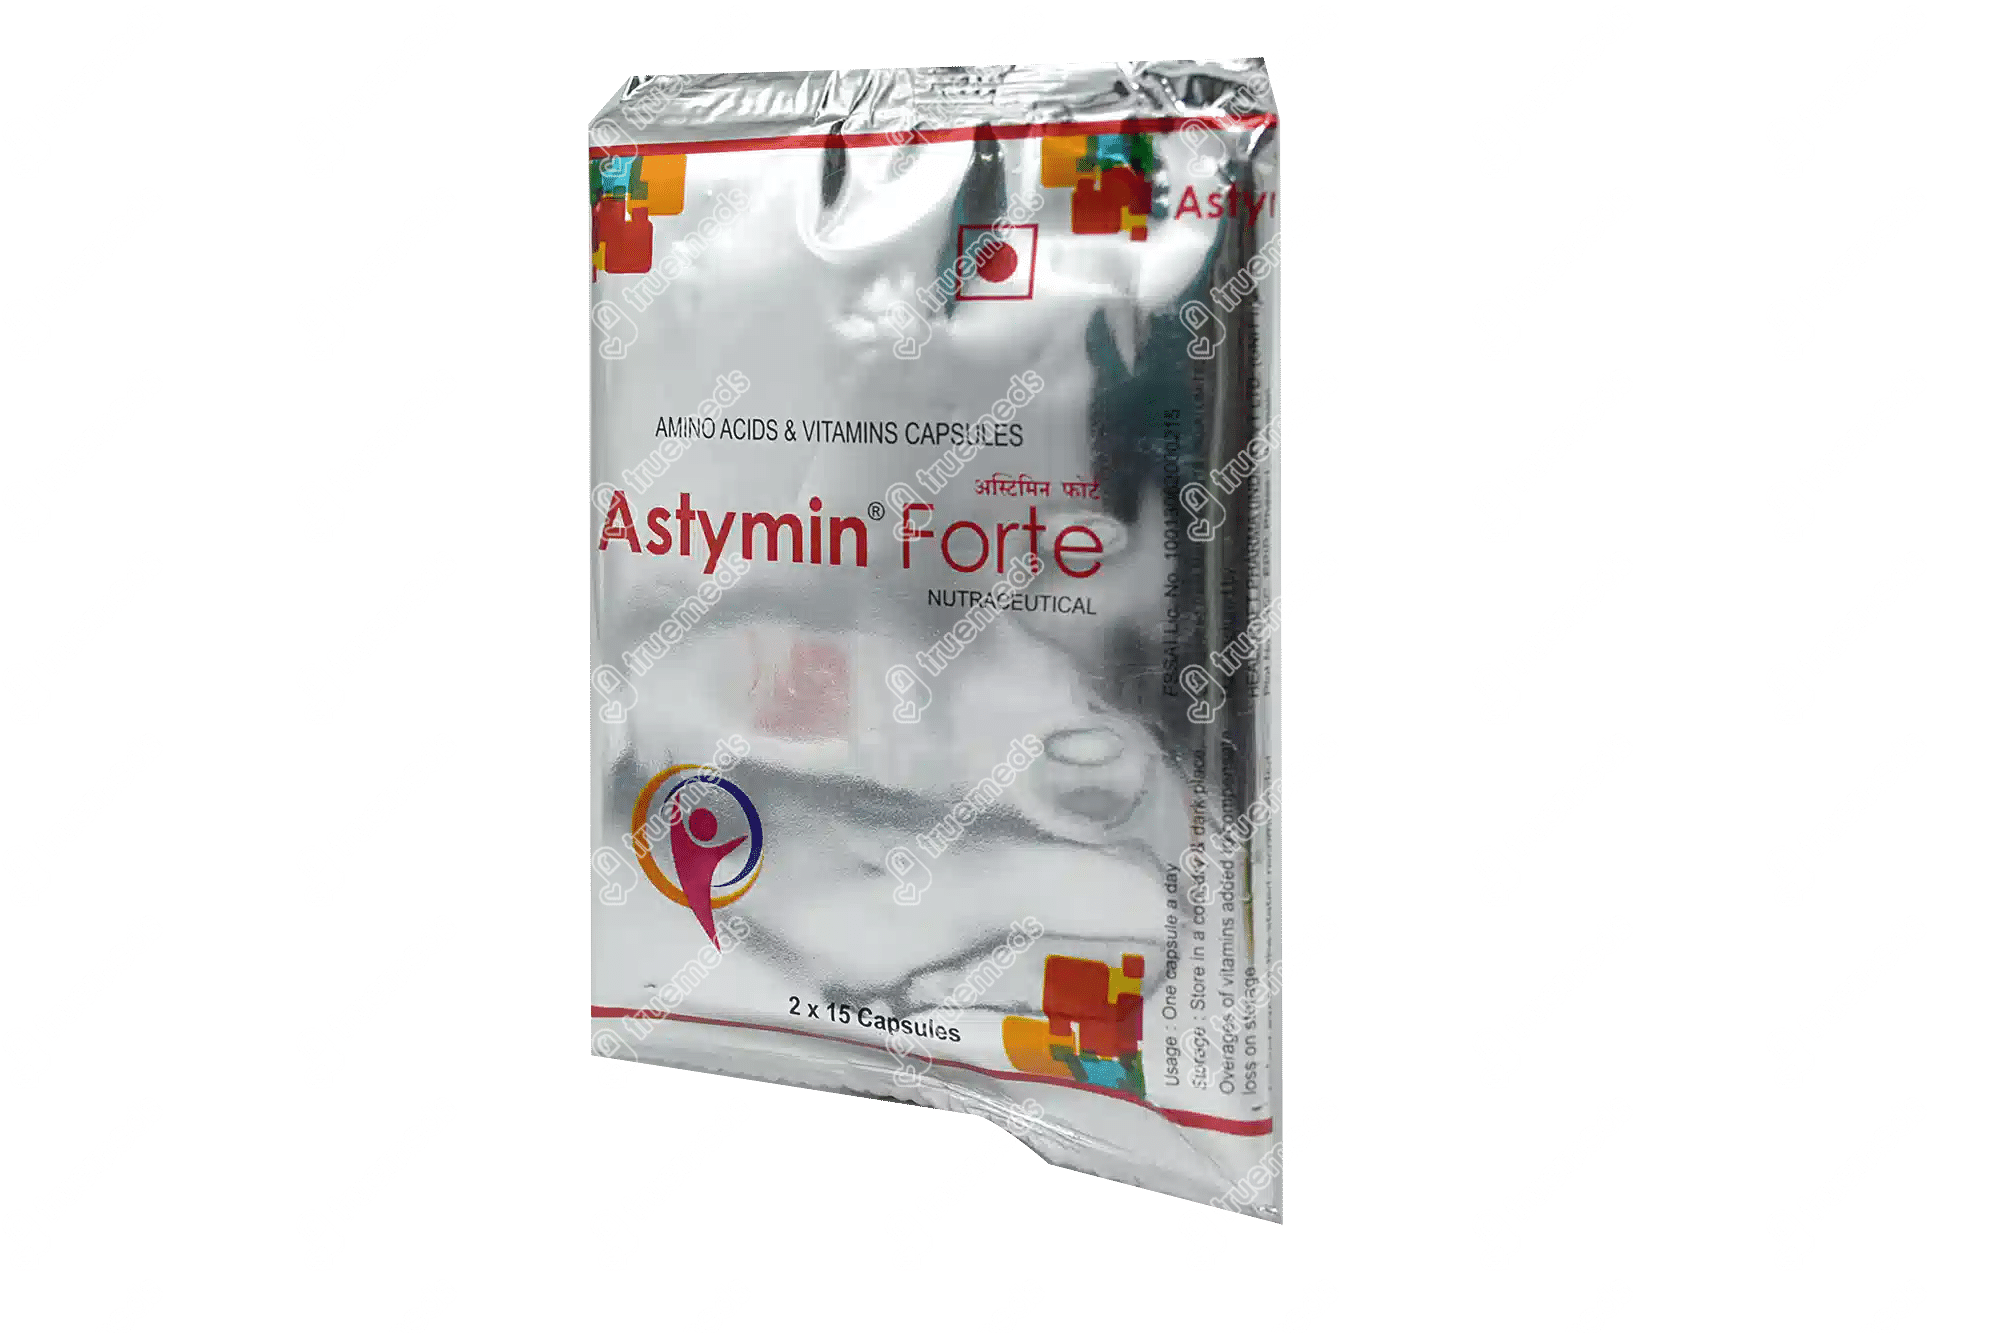 Astymin Forte Capsule 15 Pack Of 2 - Uses, Side Effects, Dosage, Price ...